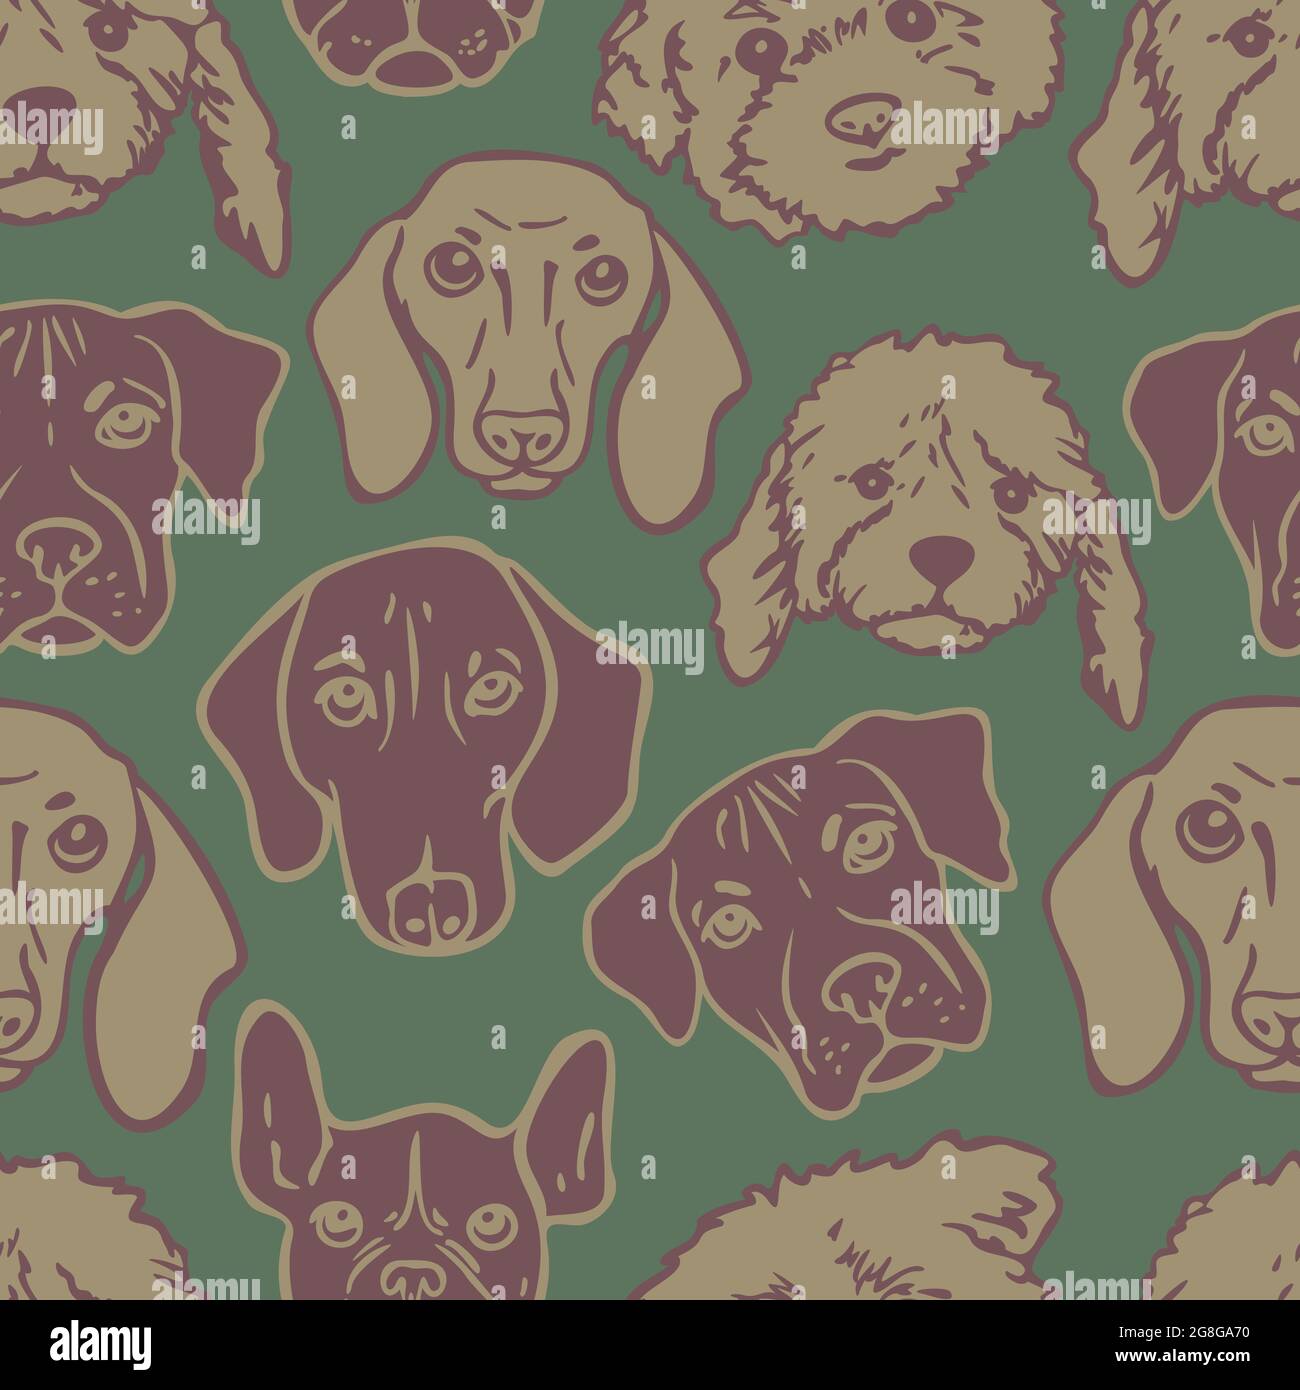 Vector seamless pattern with different dog faces. Design with various breeds of dogs. Stock Vector